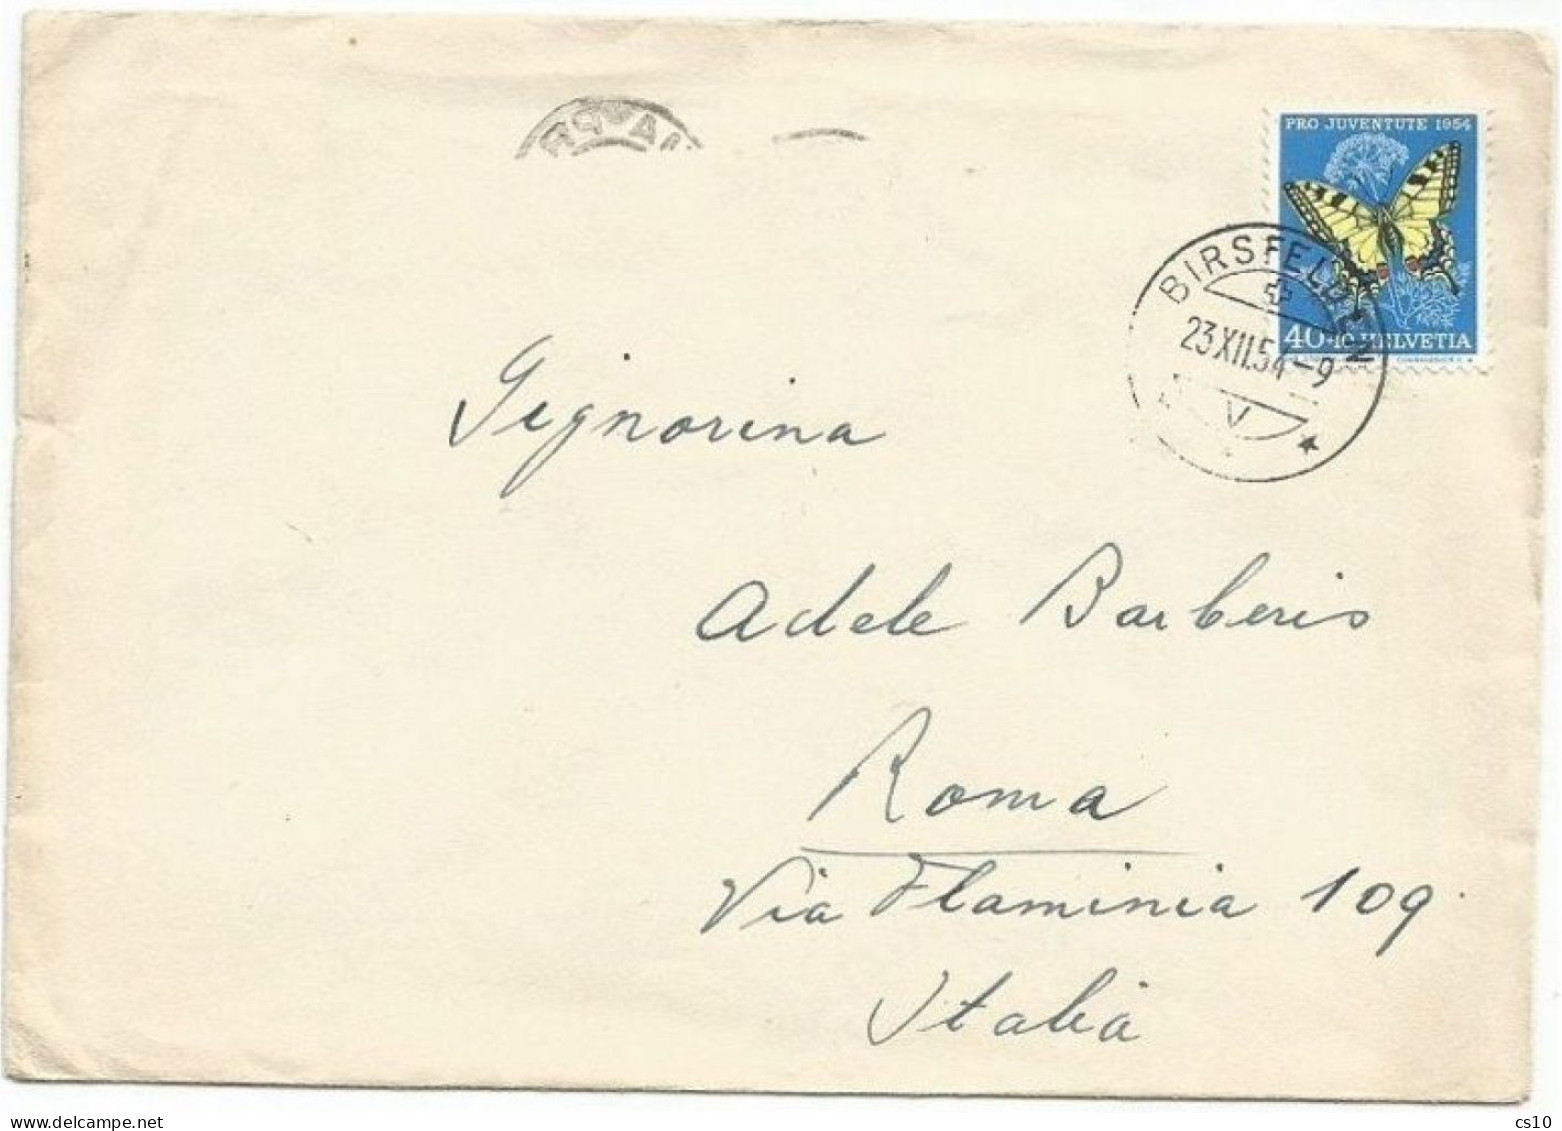 Suisse Pro Juventute 1954 Butterfly C.40+10 Solo Franking CV Birsfelden 23dec1954 To Italy - Lettres & Documents